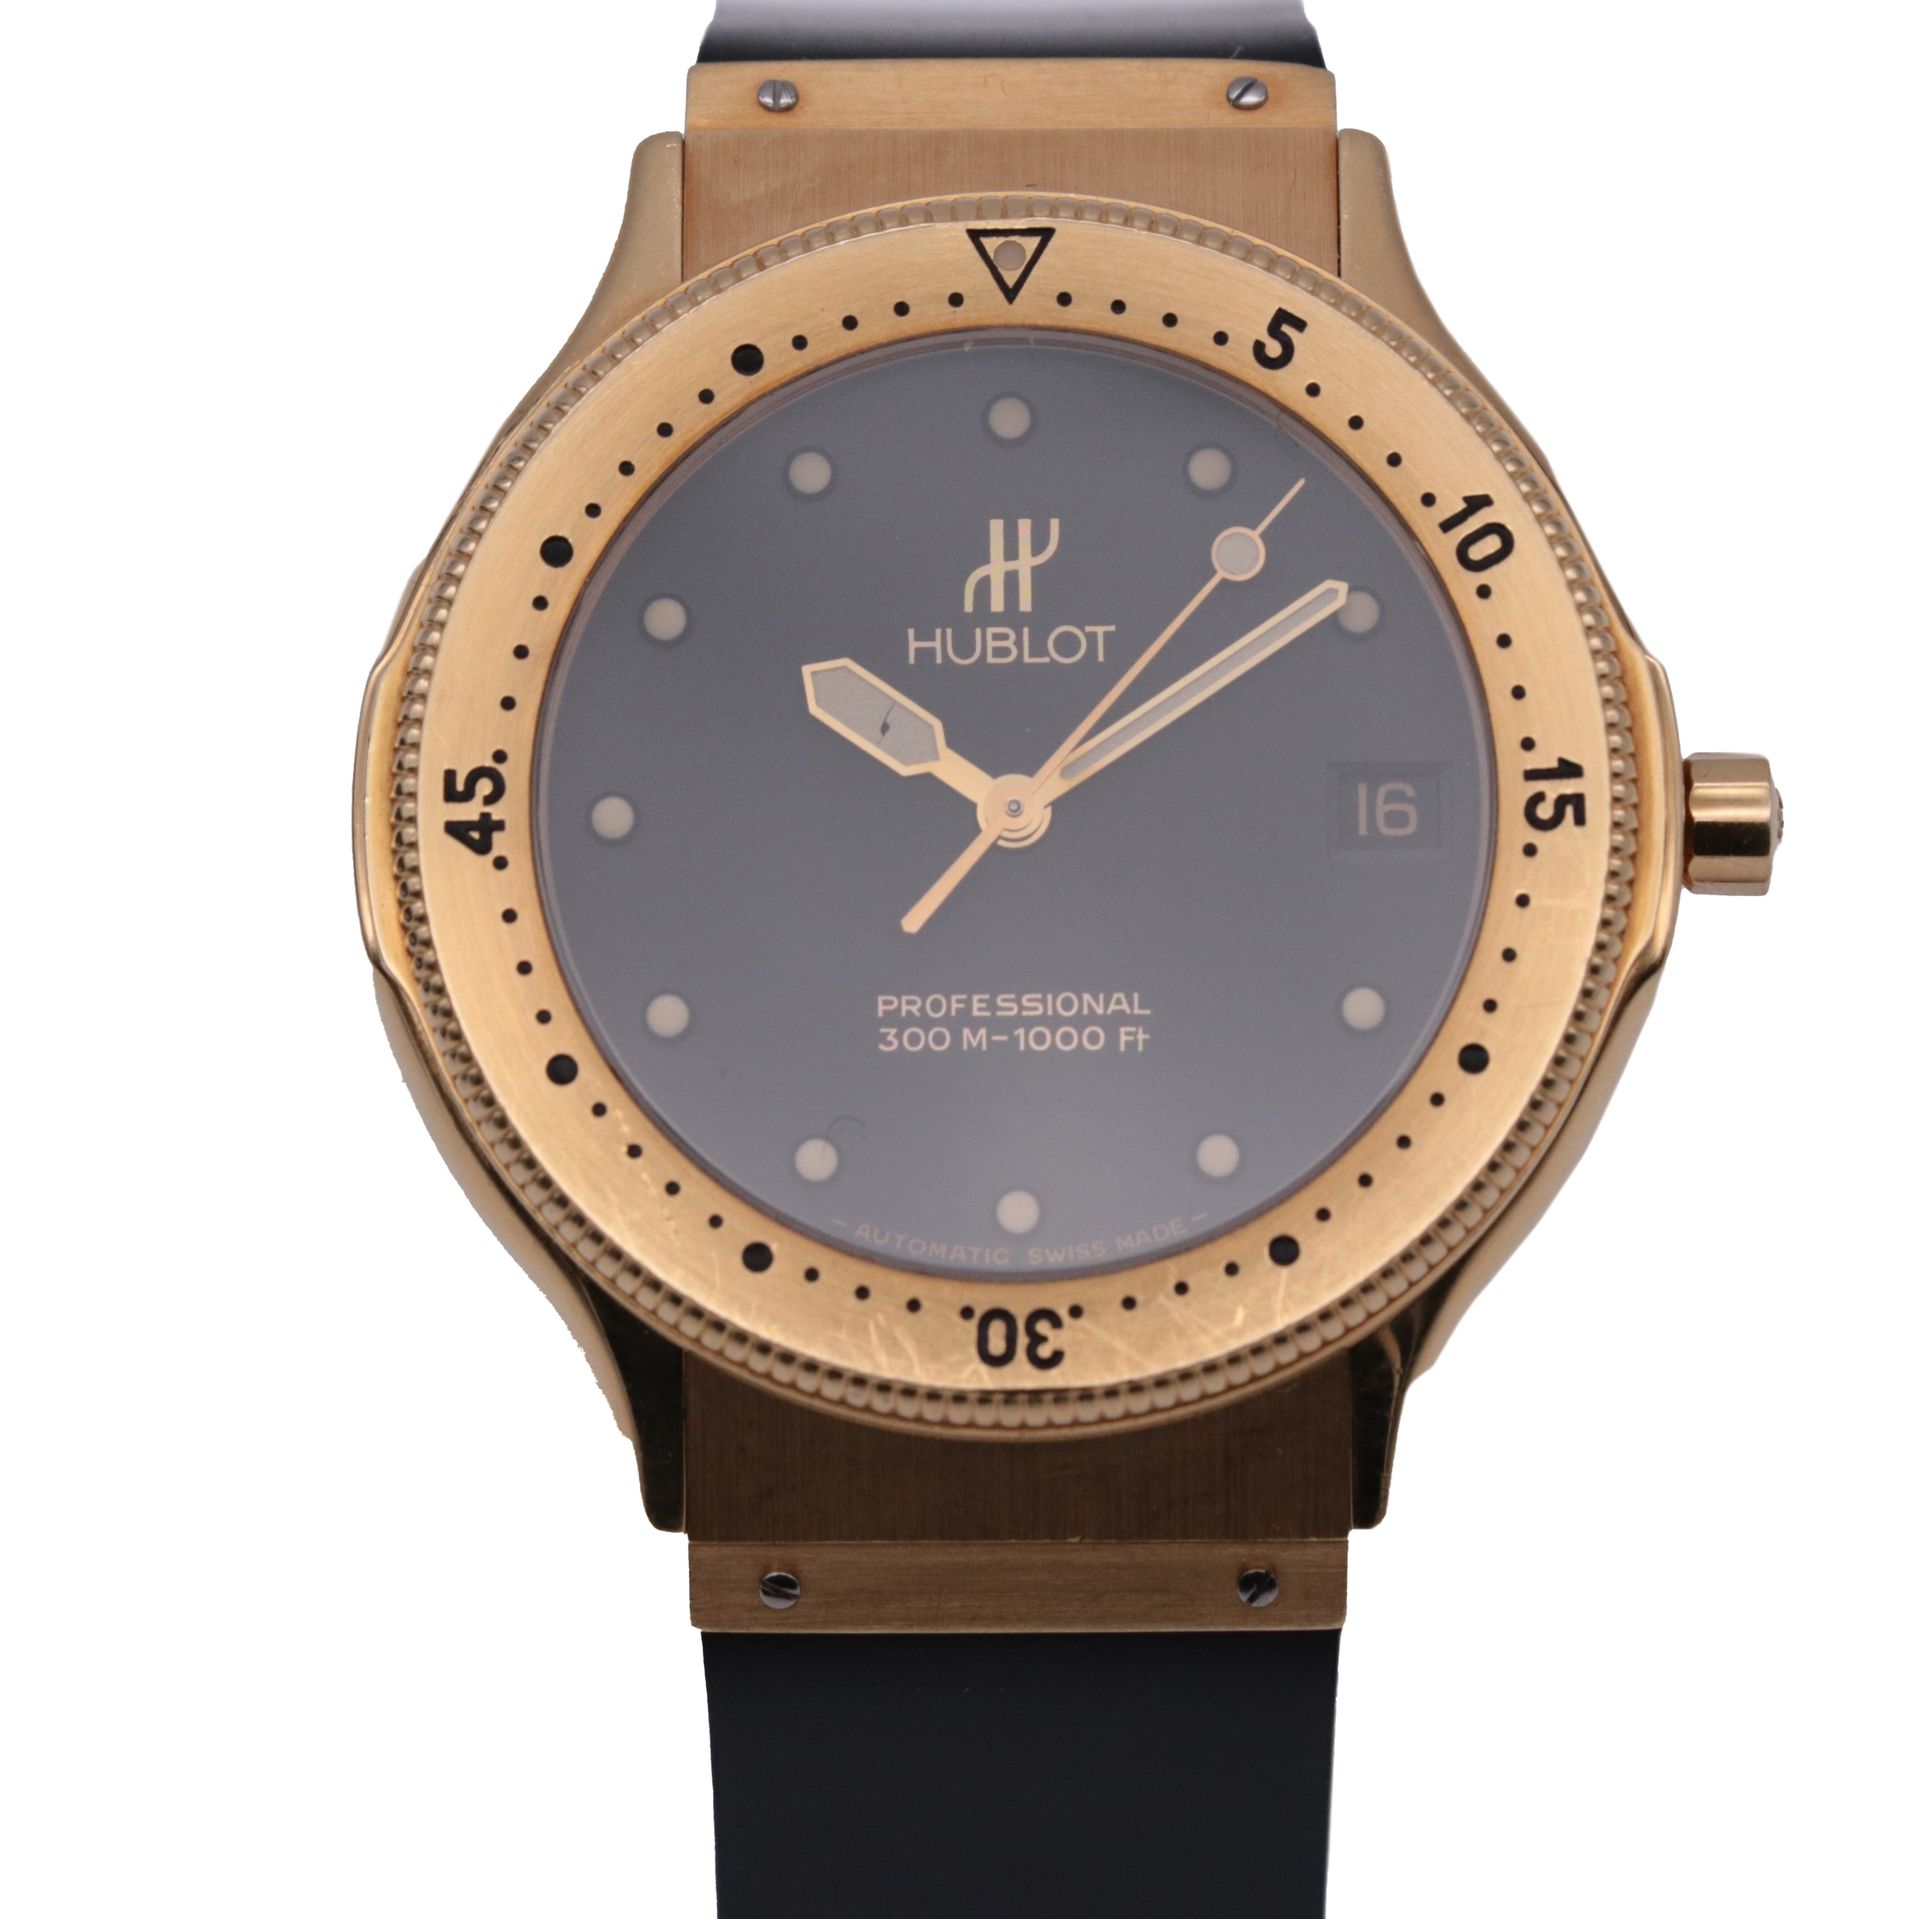 Montre Hublot, Classic Fusion The case in 18K yellow gold, signed

The circular &hellip;